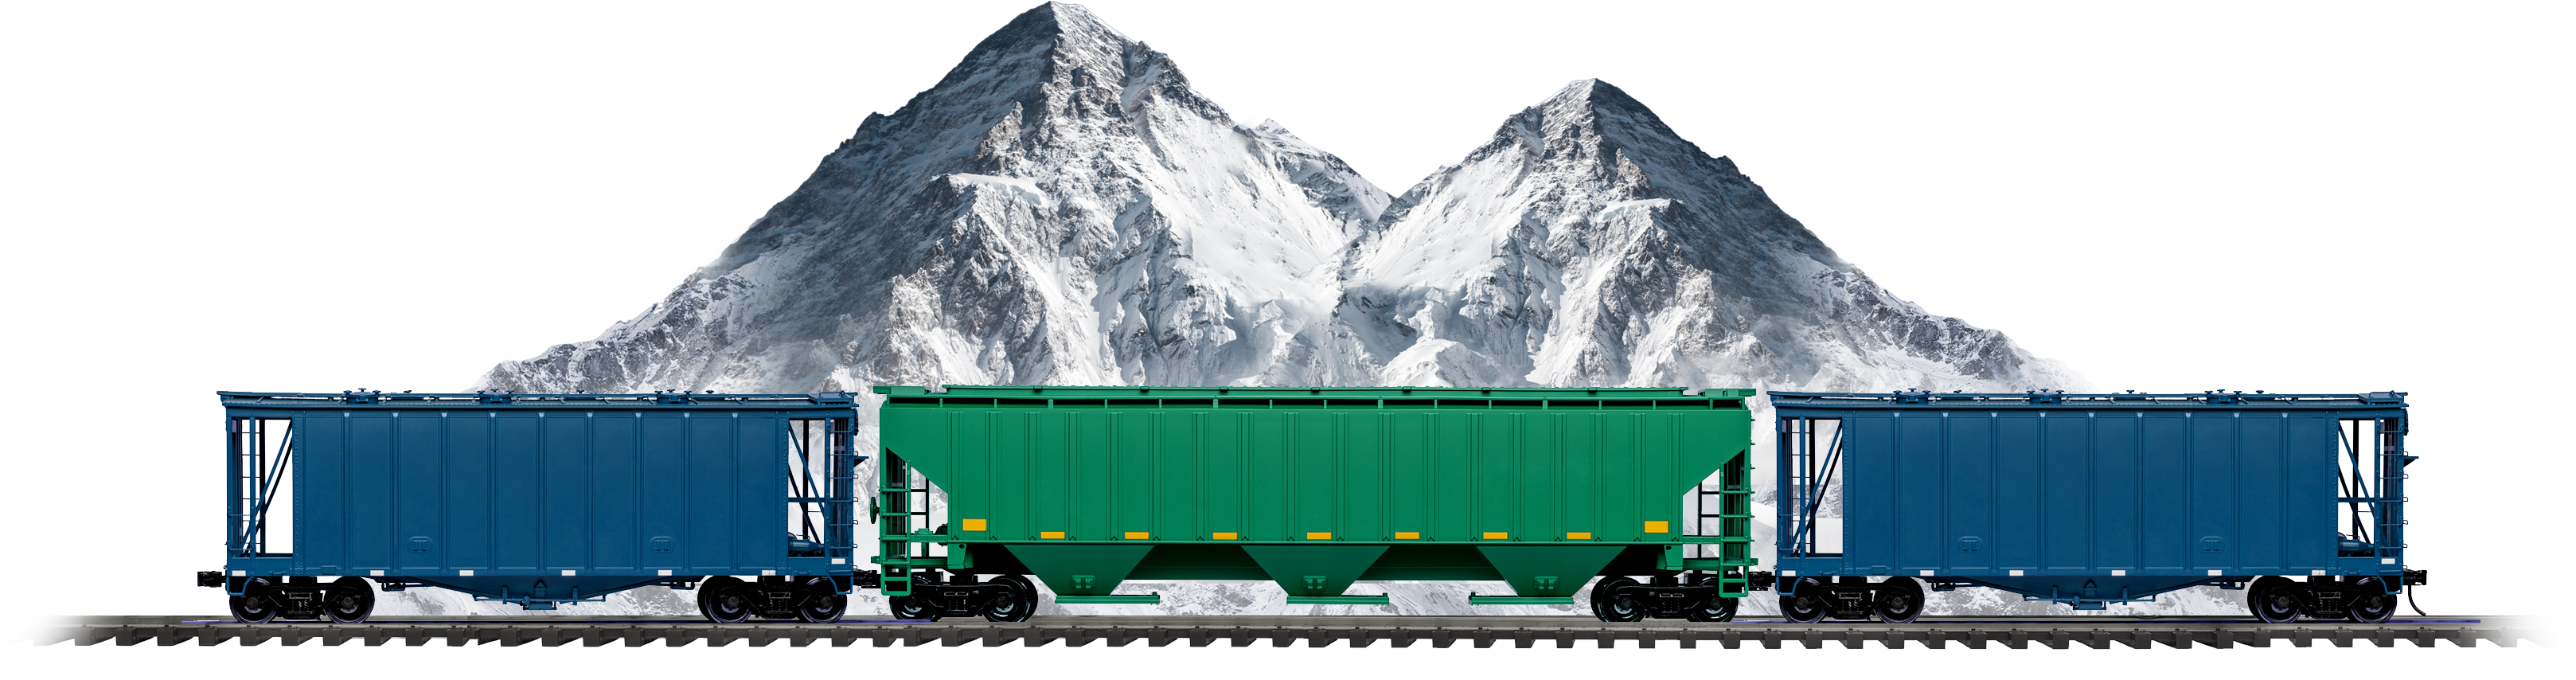 Train passing in front of snowy mountains